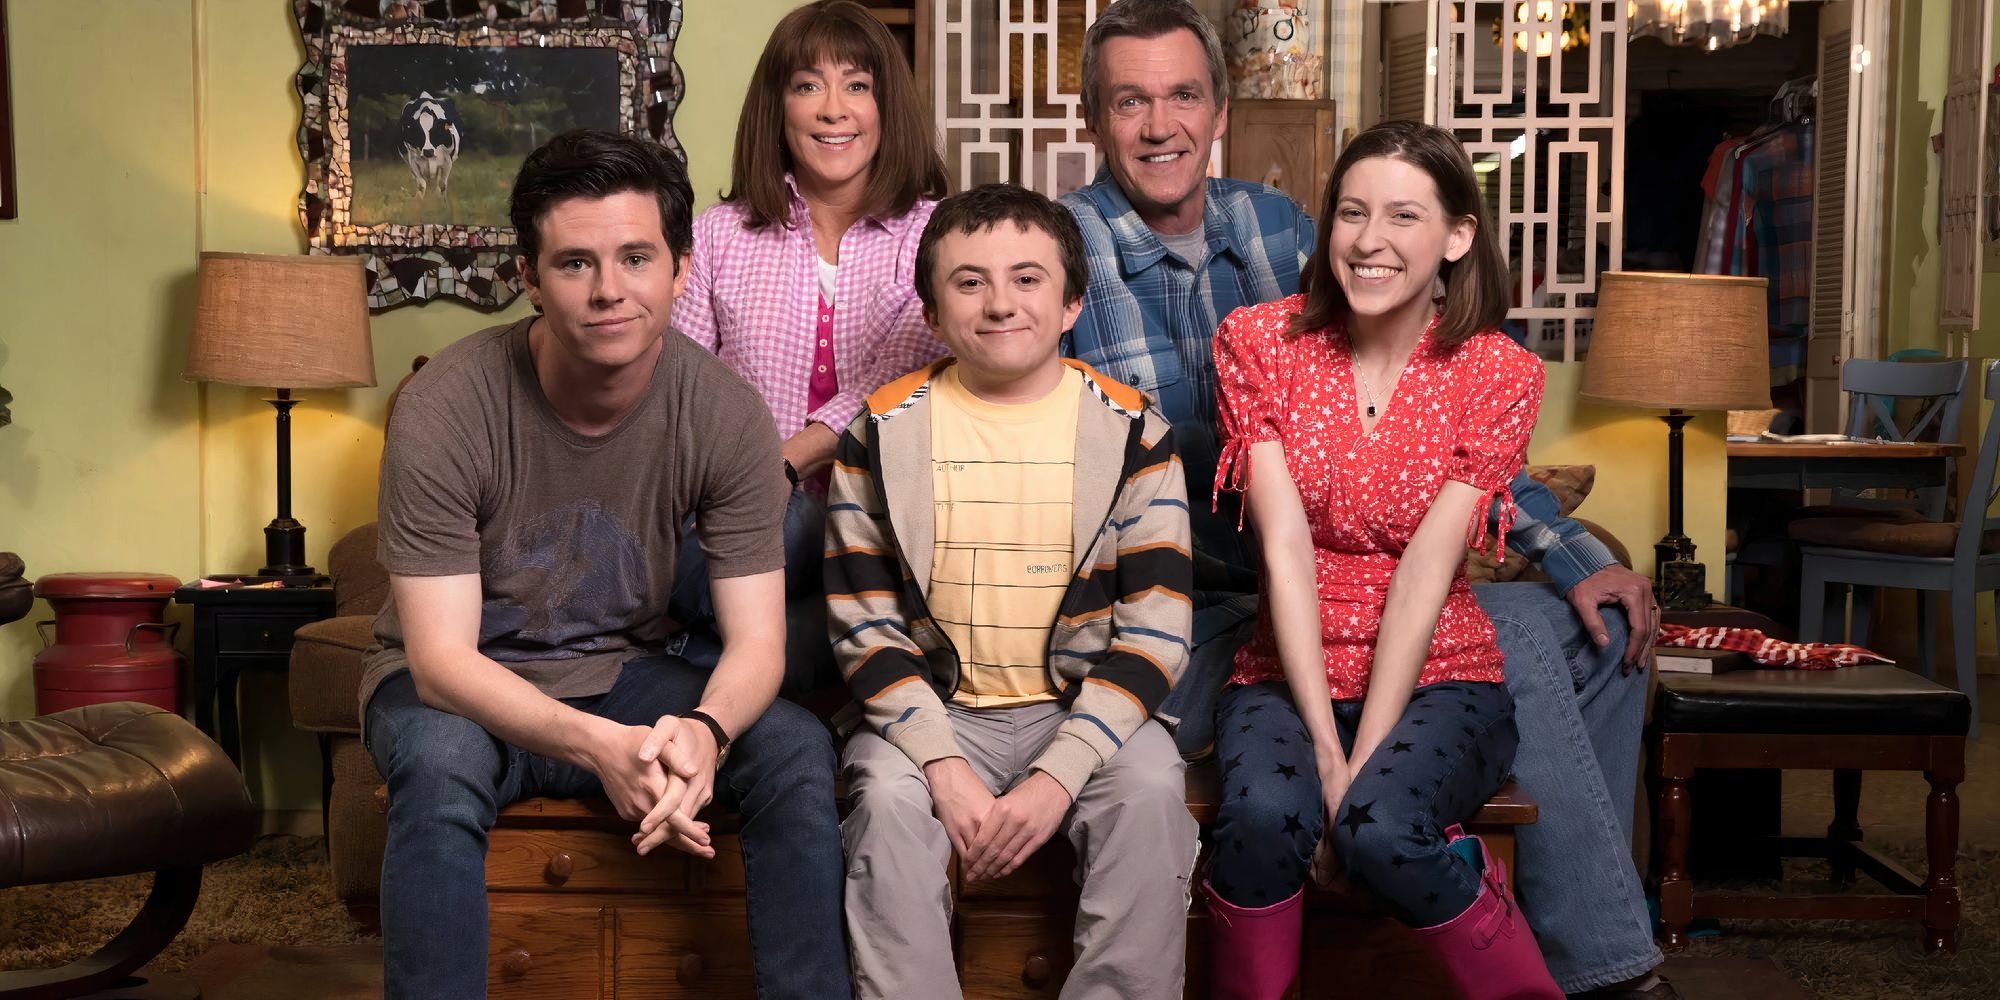 The cast of the middle sitting next to each other on a sofa.